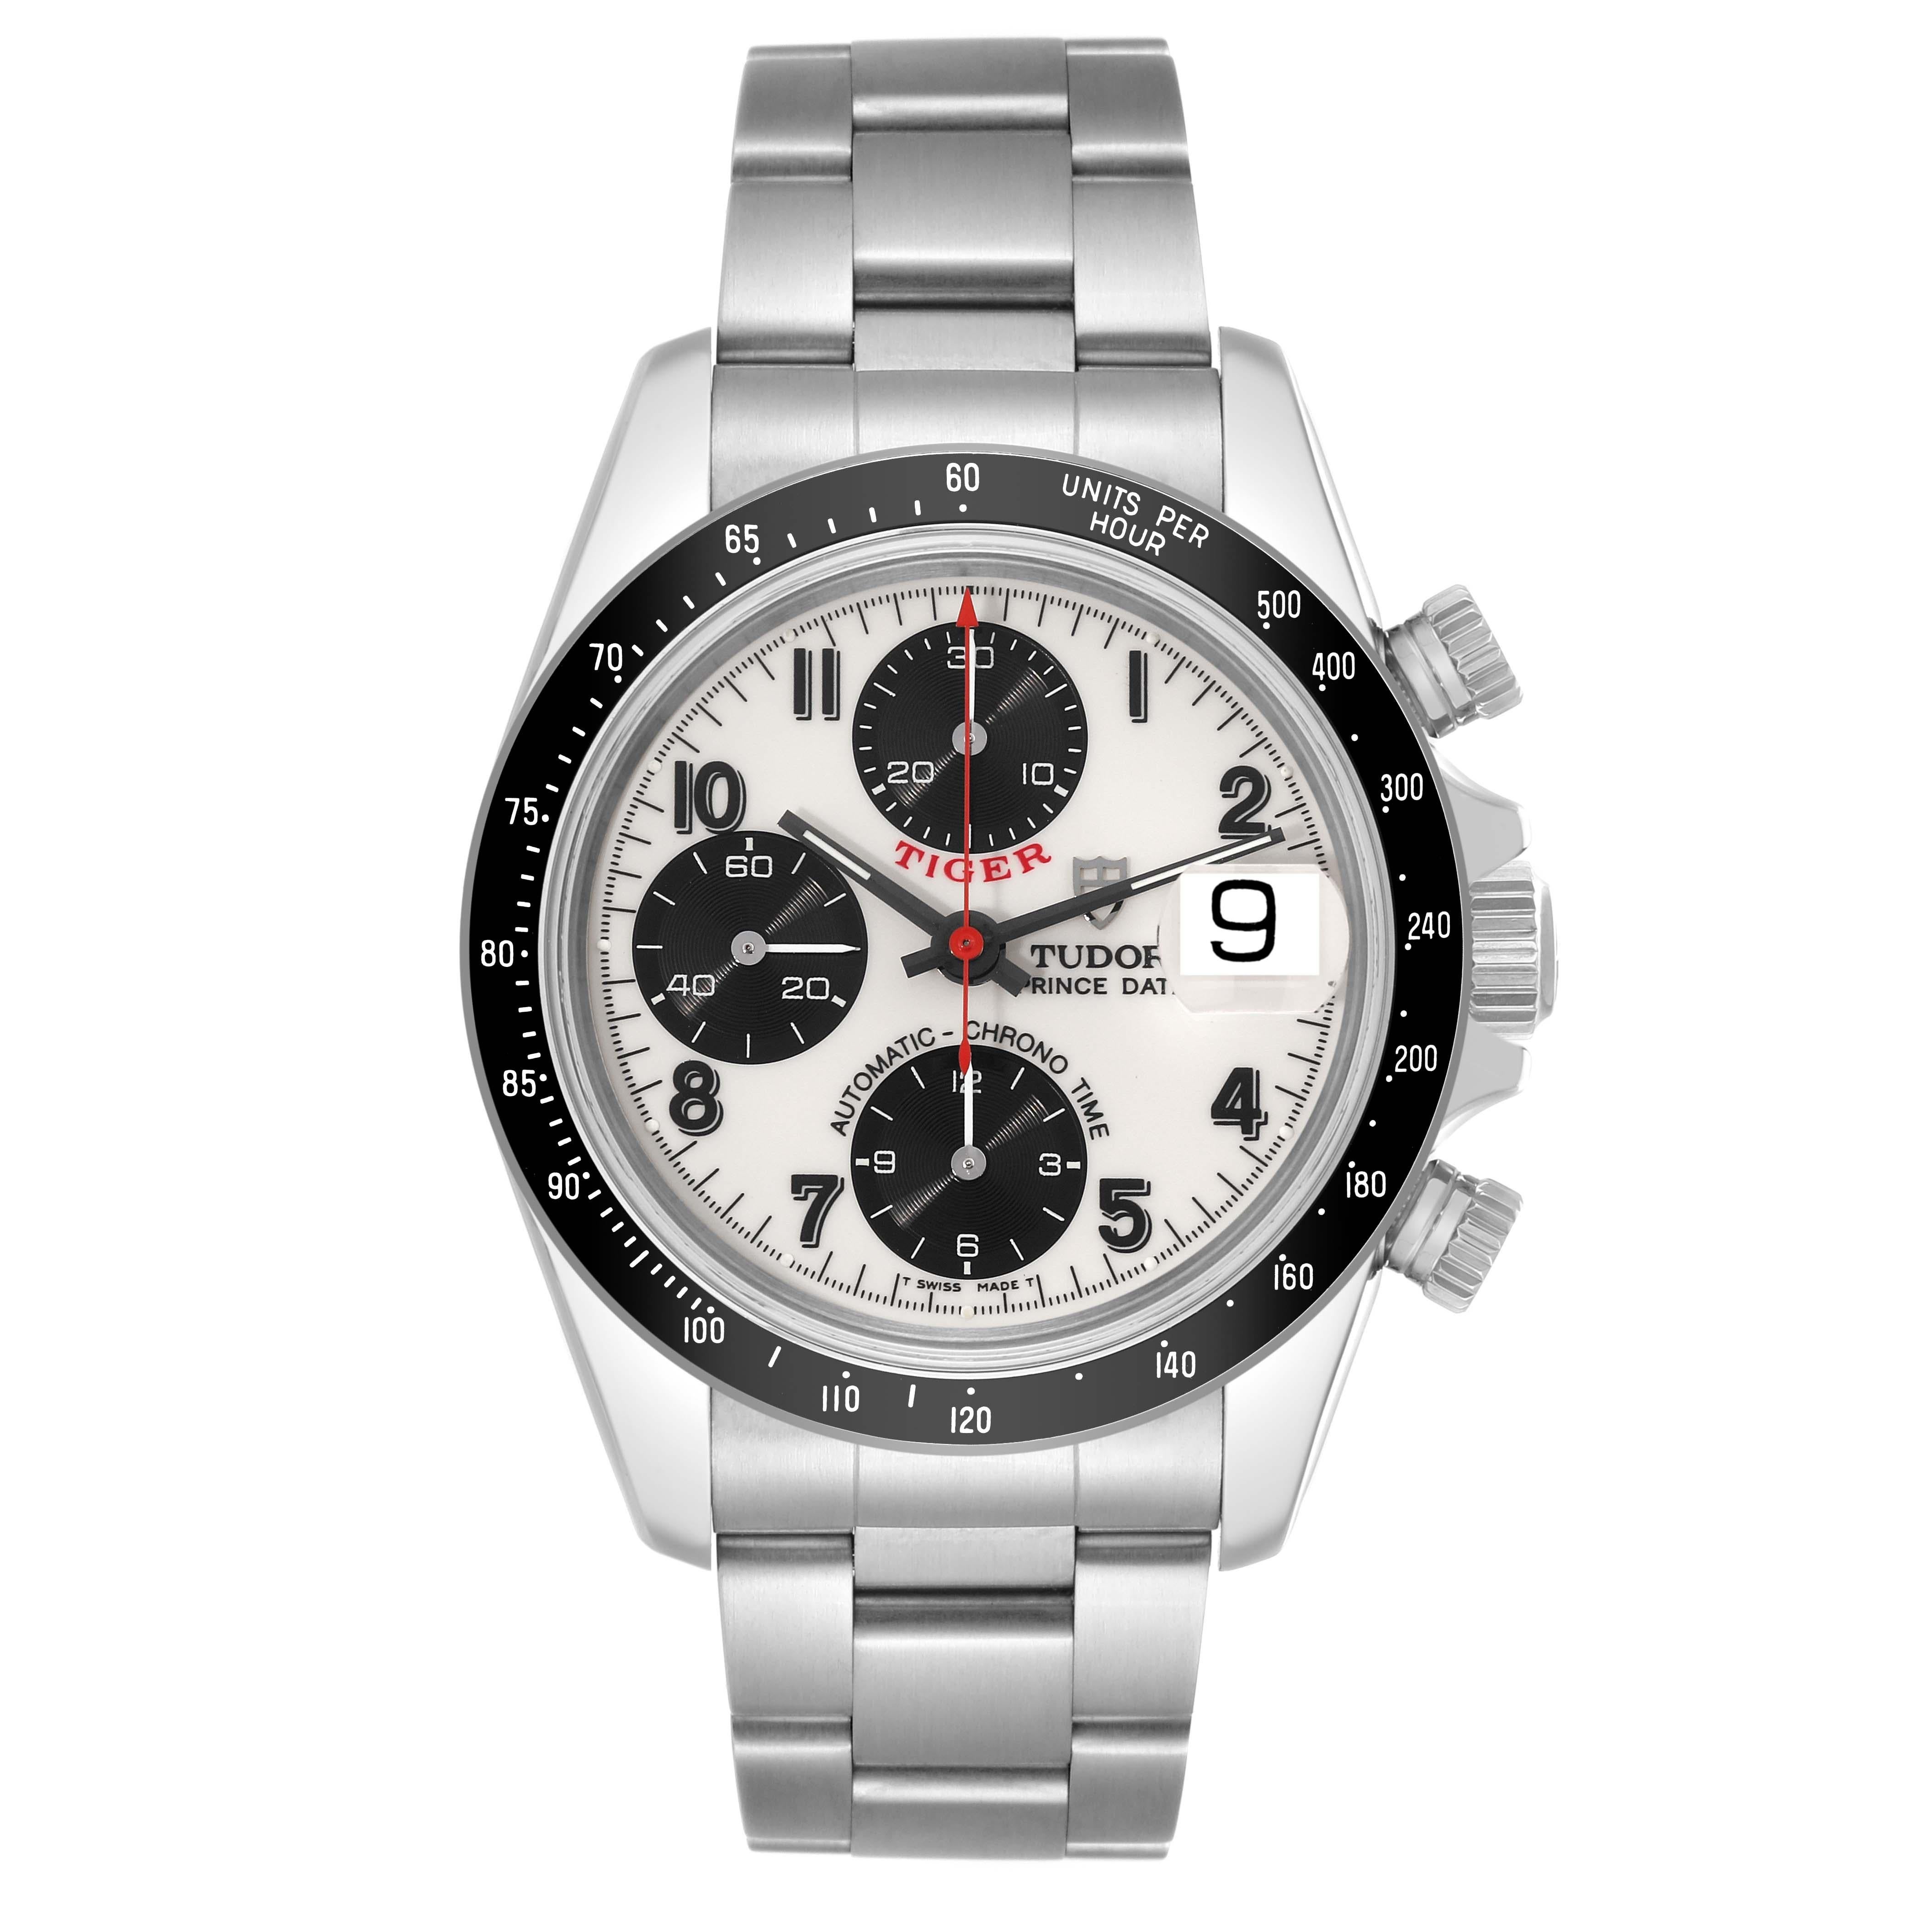 Tudor Tiger Woods Prince White Panda Dial Steel Mens Watch 79260 Box Papers. Automatic self-winding movement with chronograph function. Stainless steel oyster case 40.0 mm in diameter. Tudor logo on a crown. Black tachometer bezel. Scratch resistant